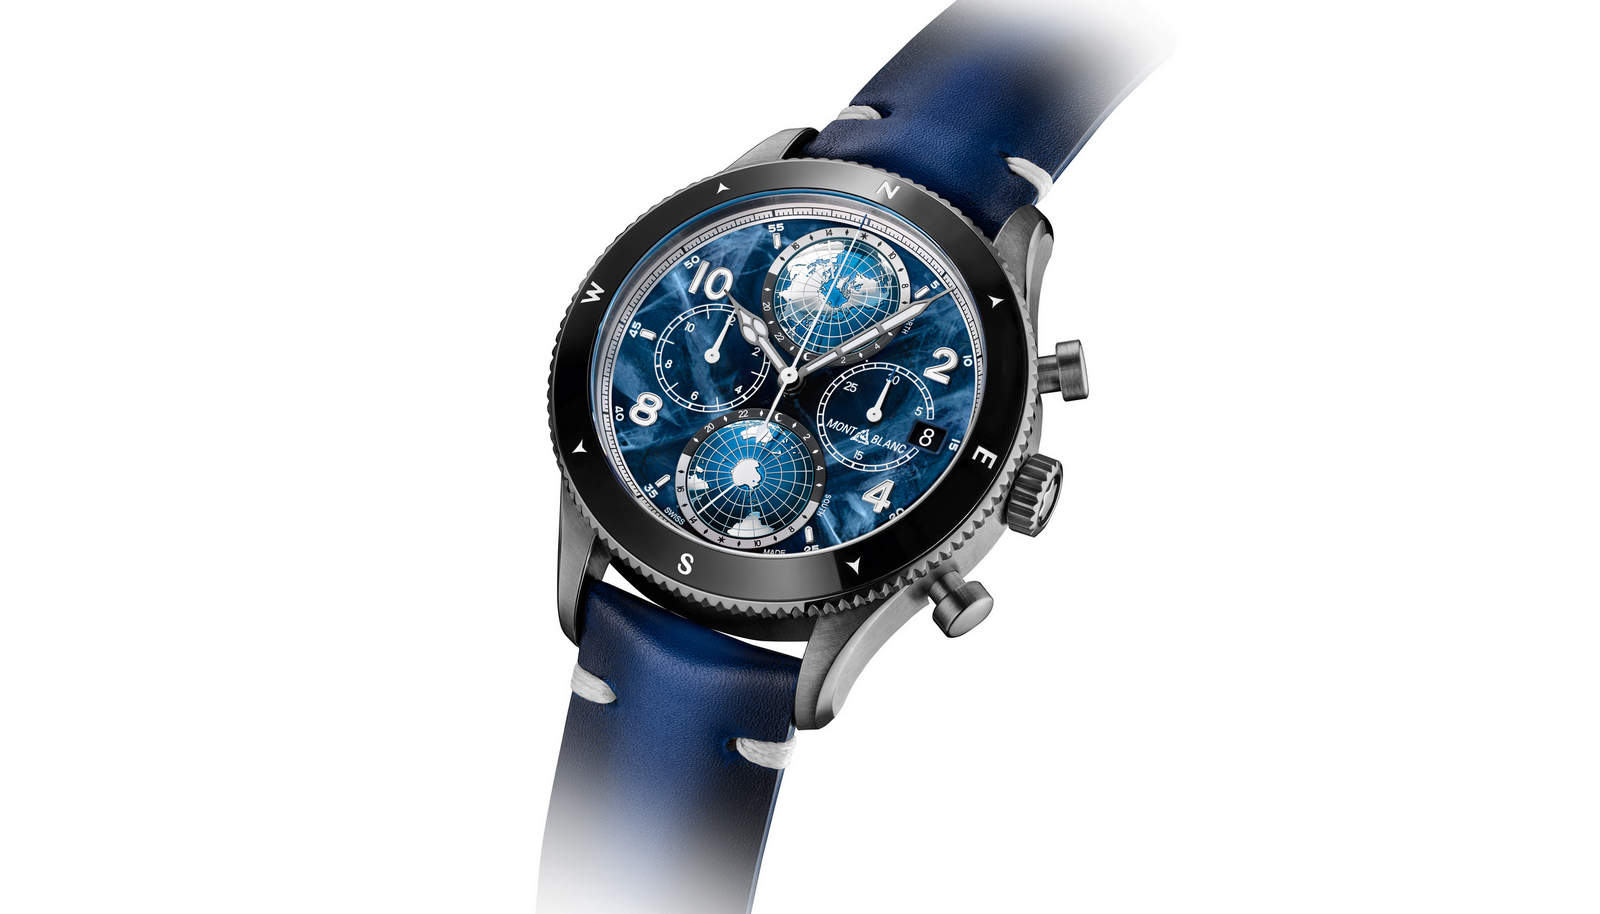 The unbelievably durable Montblanc 1858 Geosphere Chronograph Zero Oxygen watch confirms its first Everest expedition in May